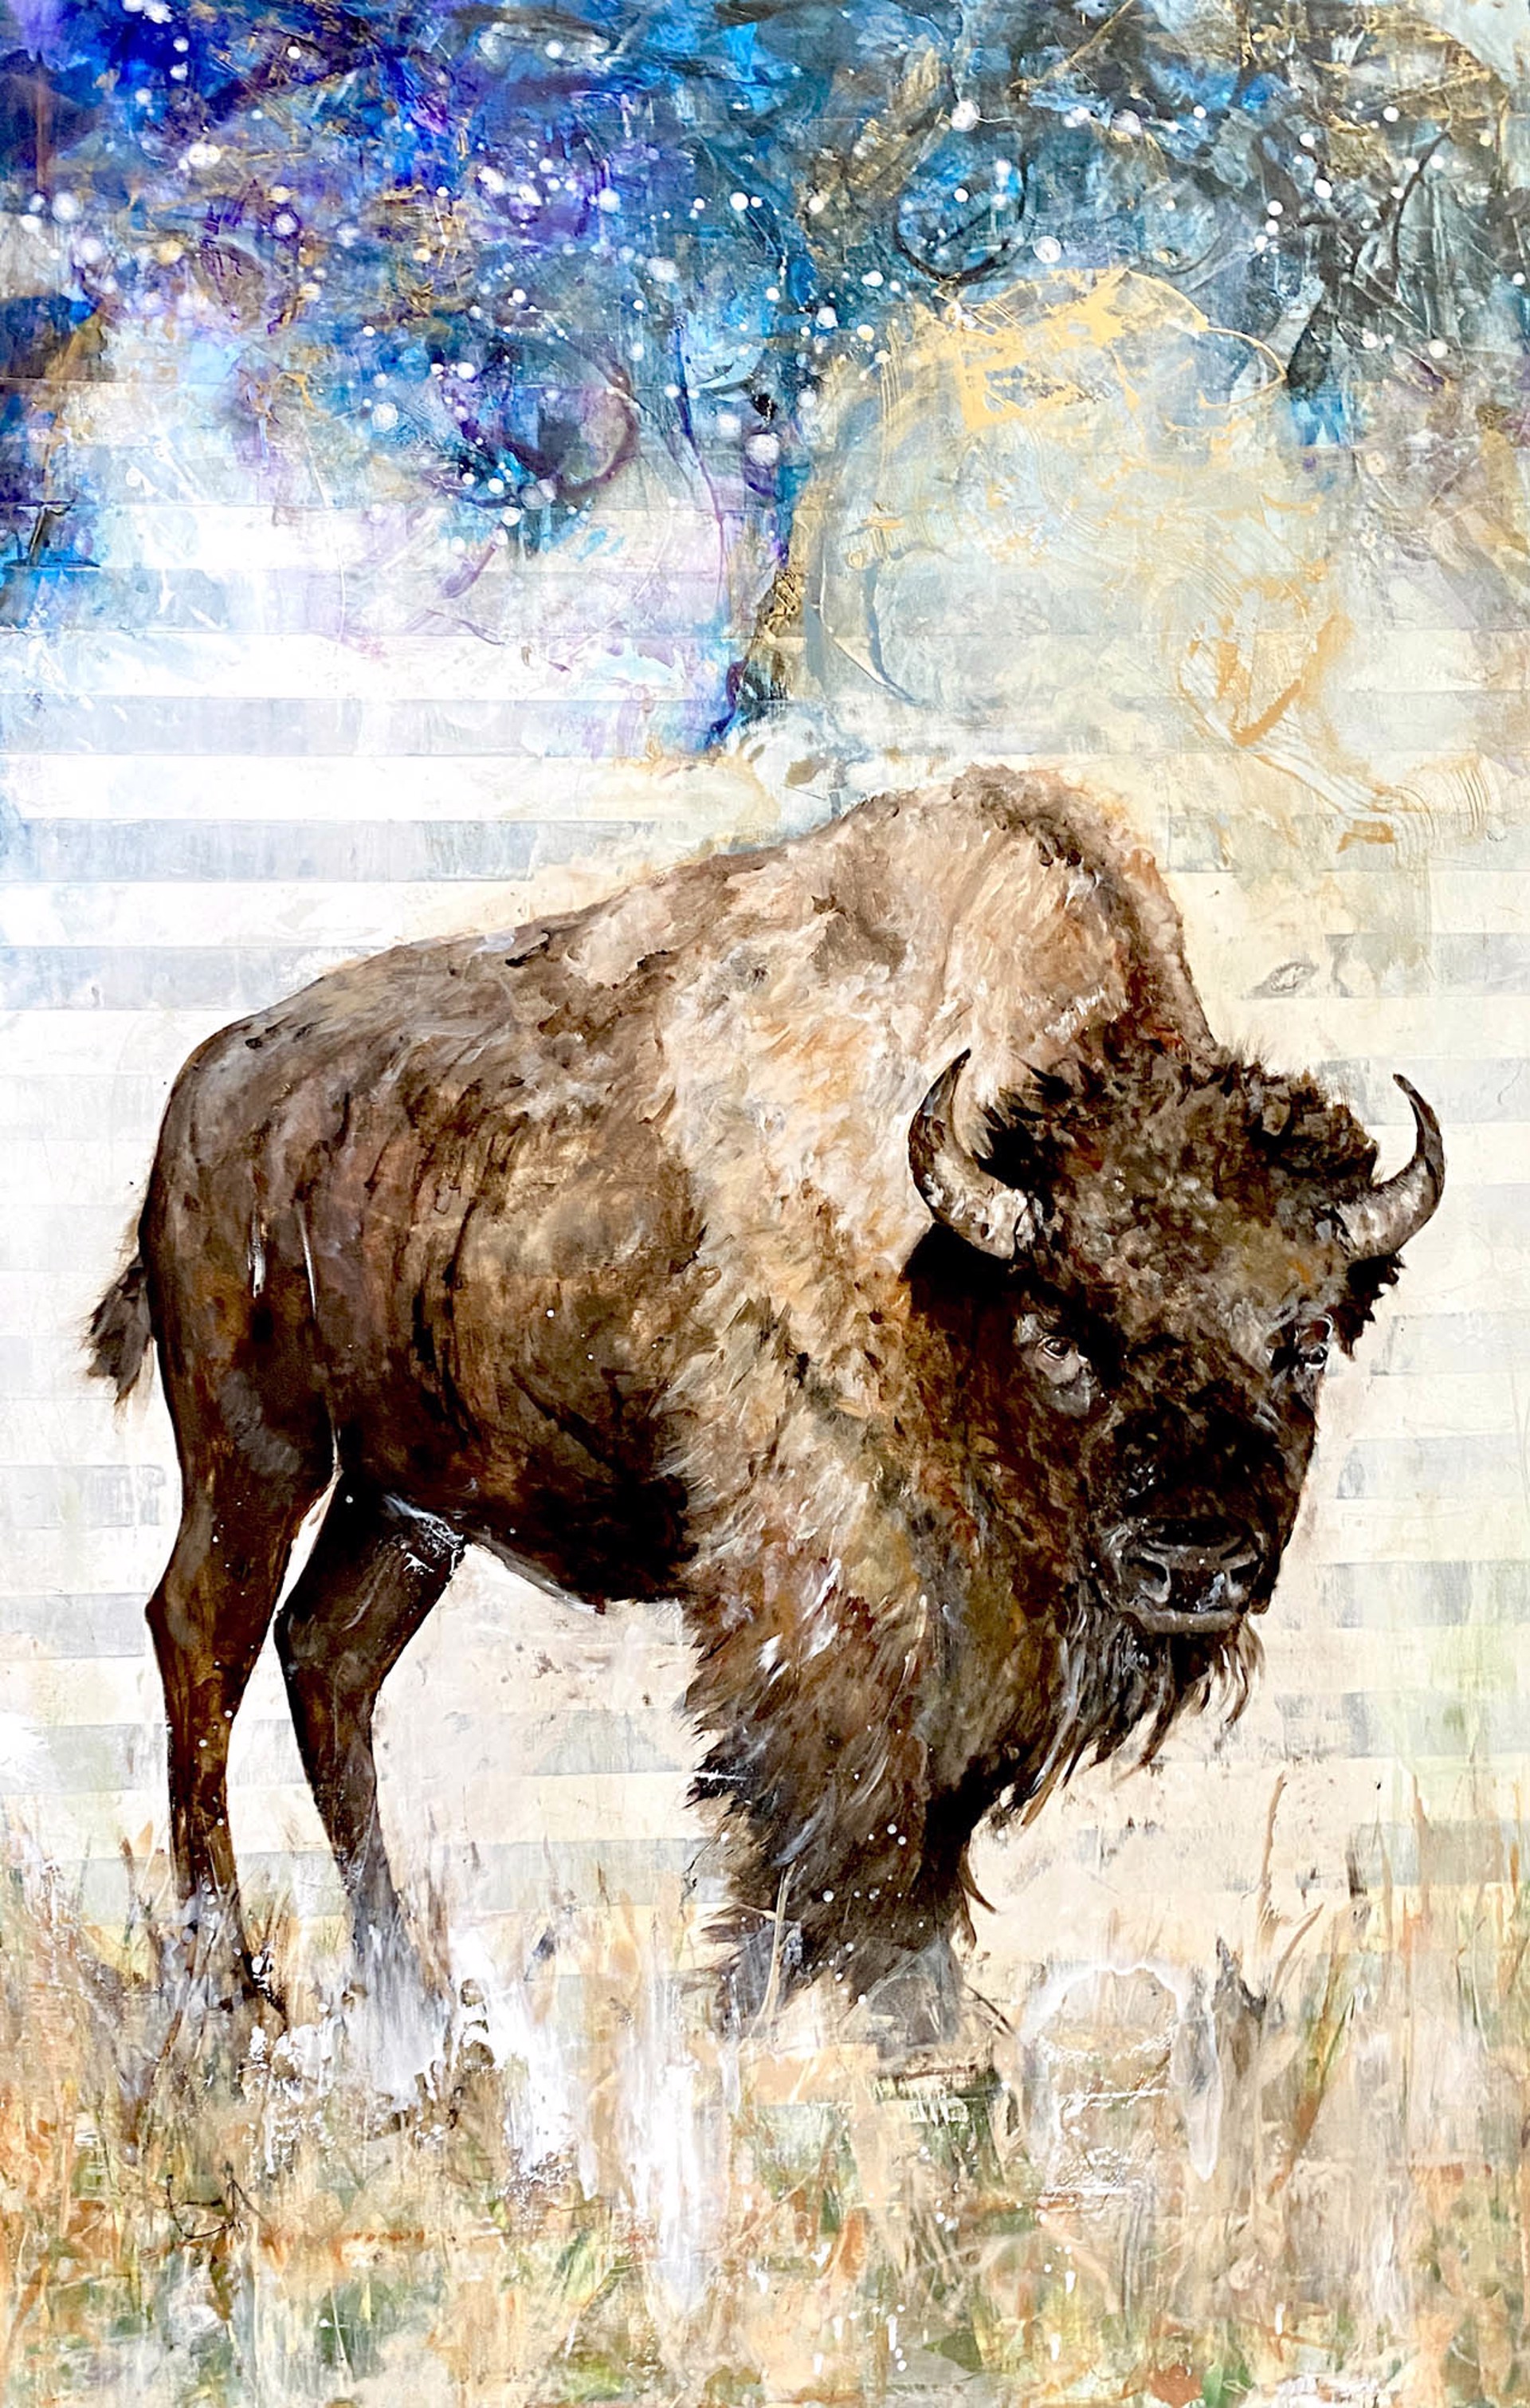 Original Oil Painting Featuring A Bison Over Abstracted Landscape Background With Starry Night Sky 